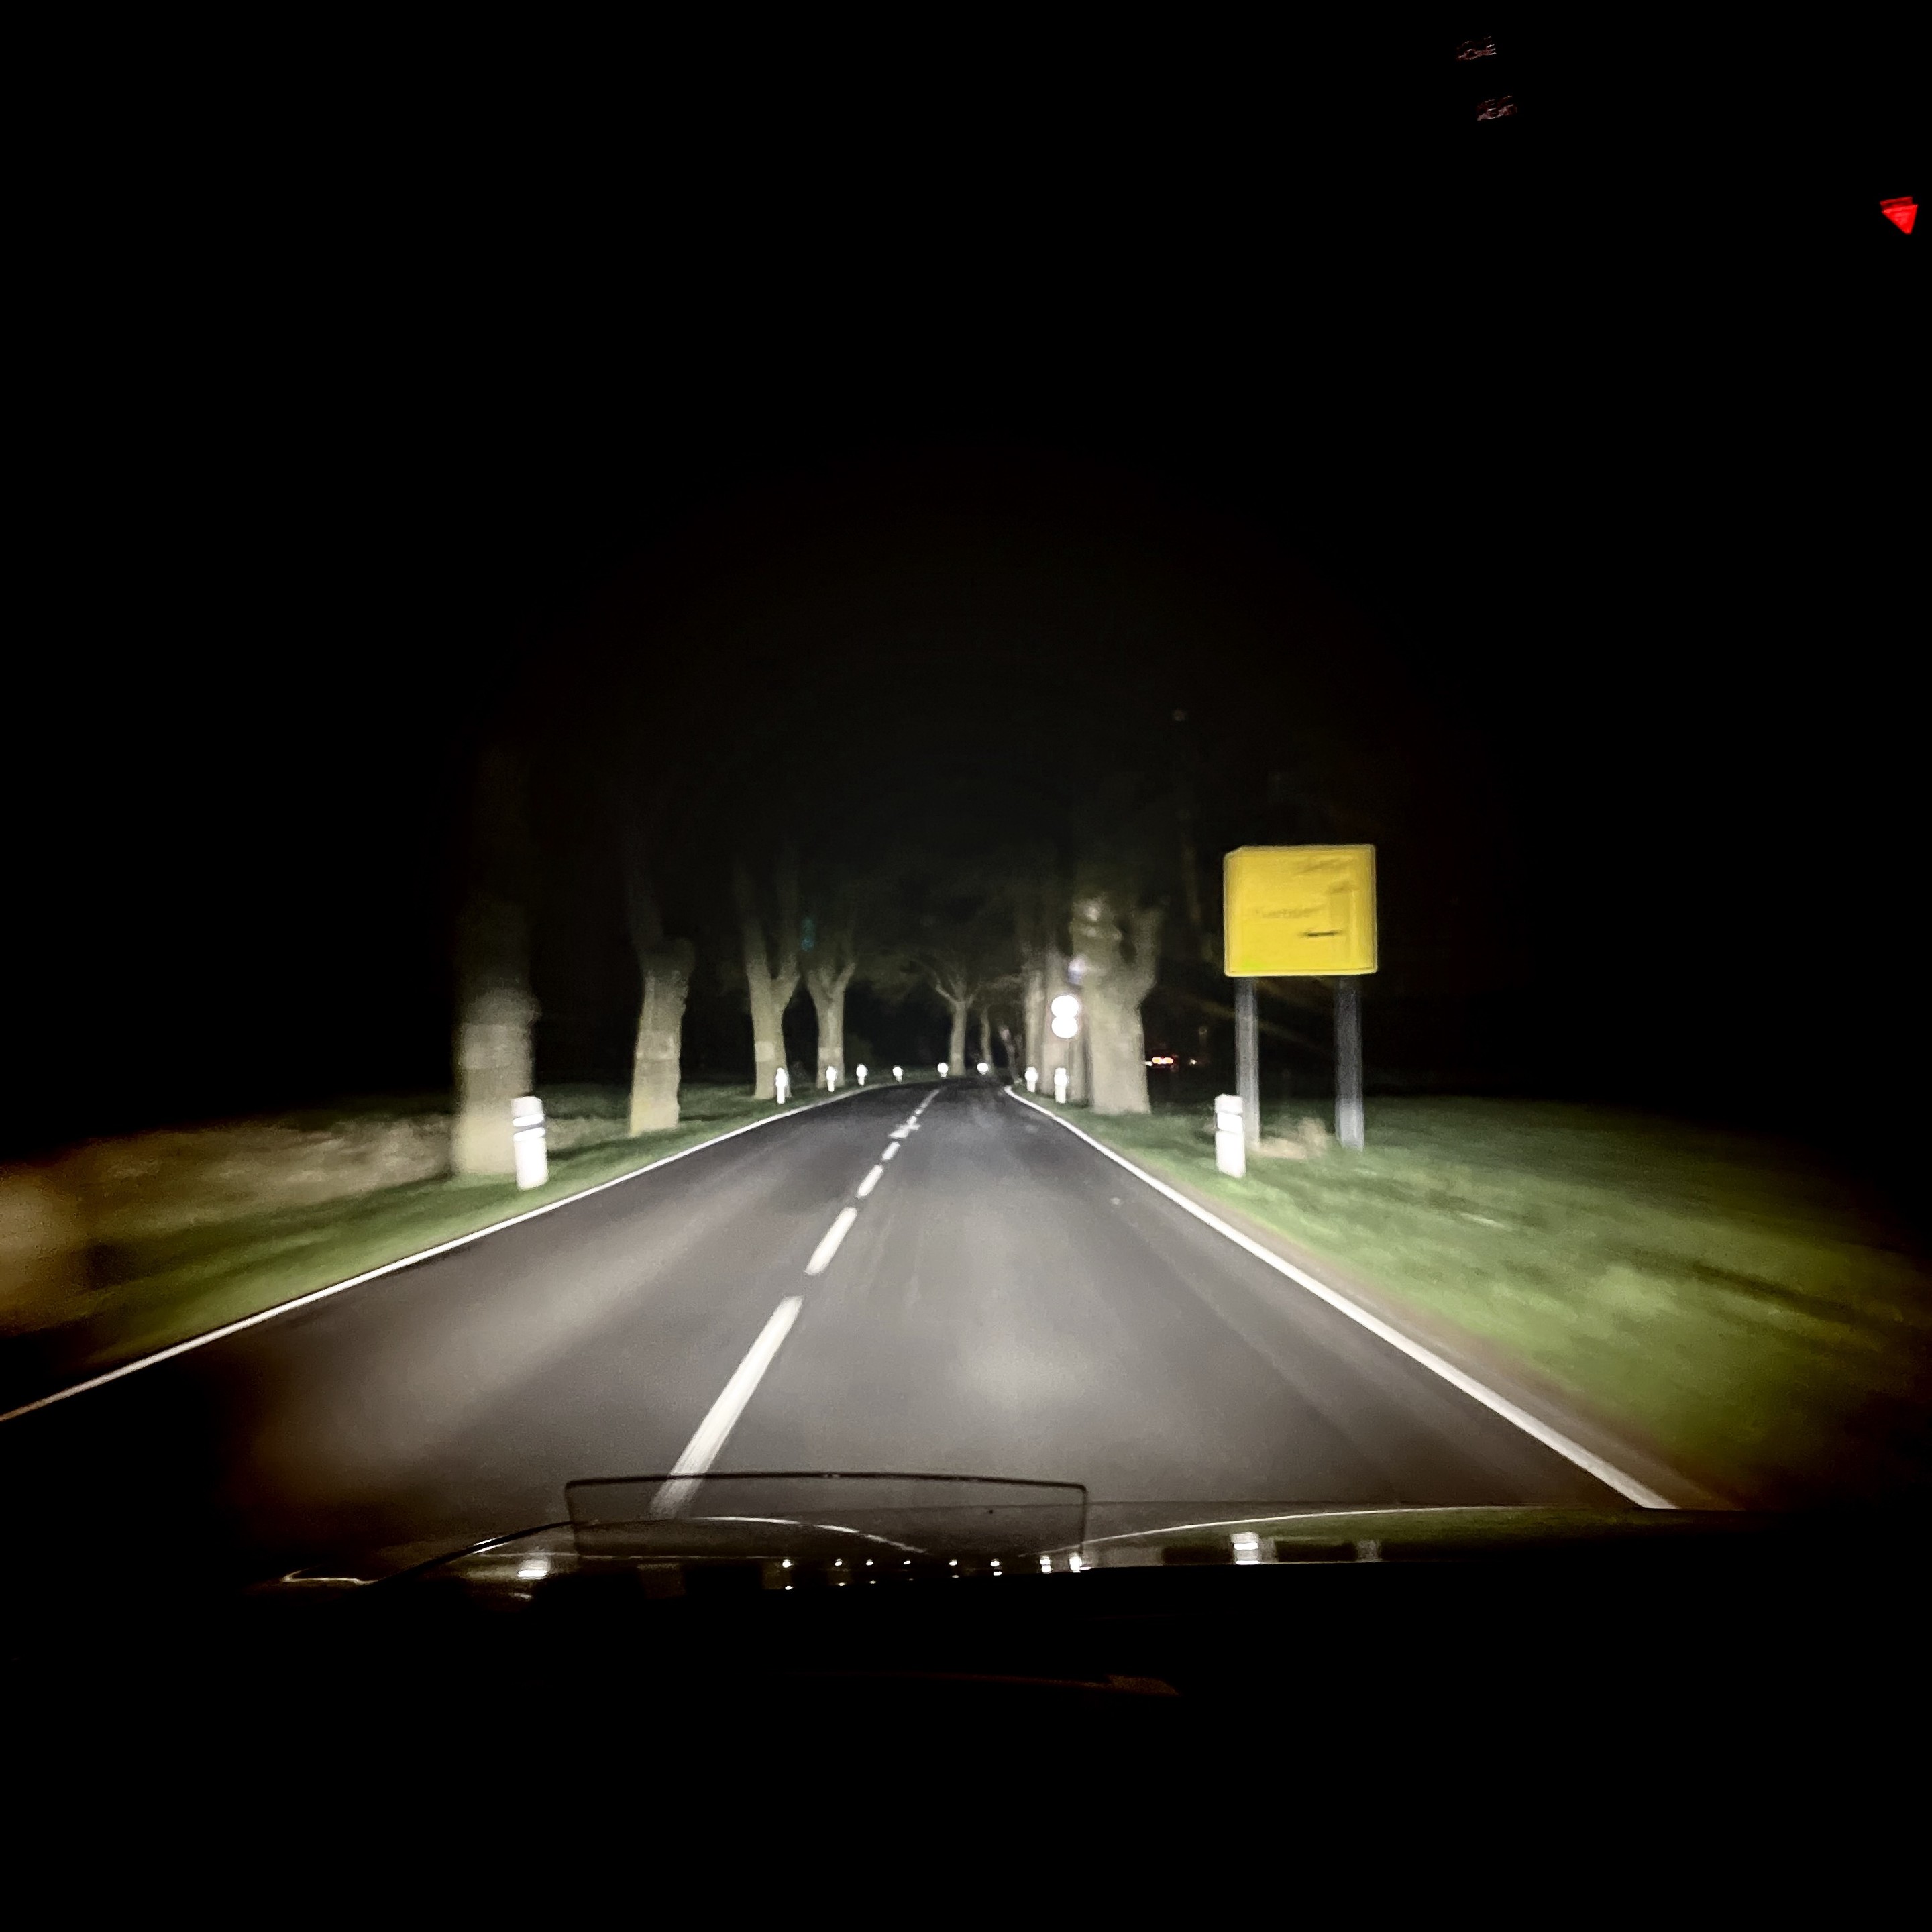 Nighttime view from inside a car driving down a tree-lined road with headlights illuminating the way.